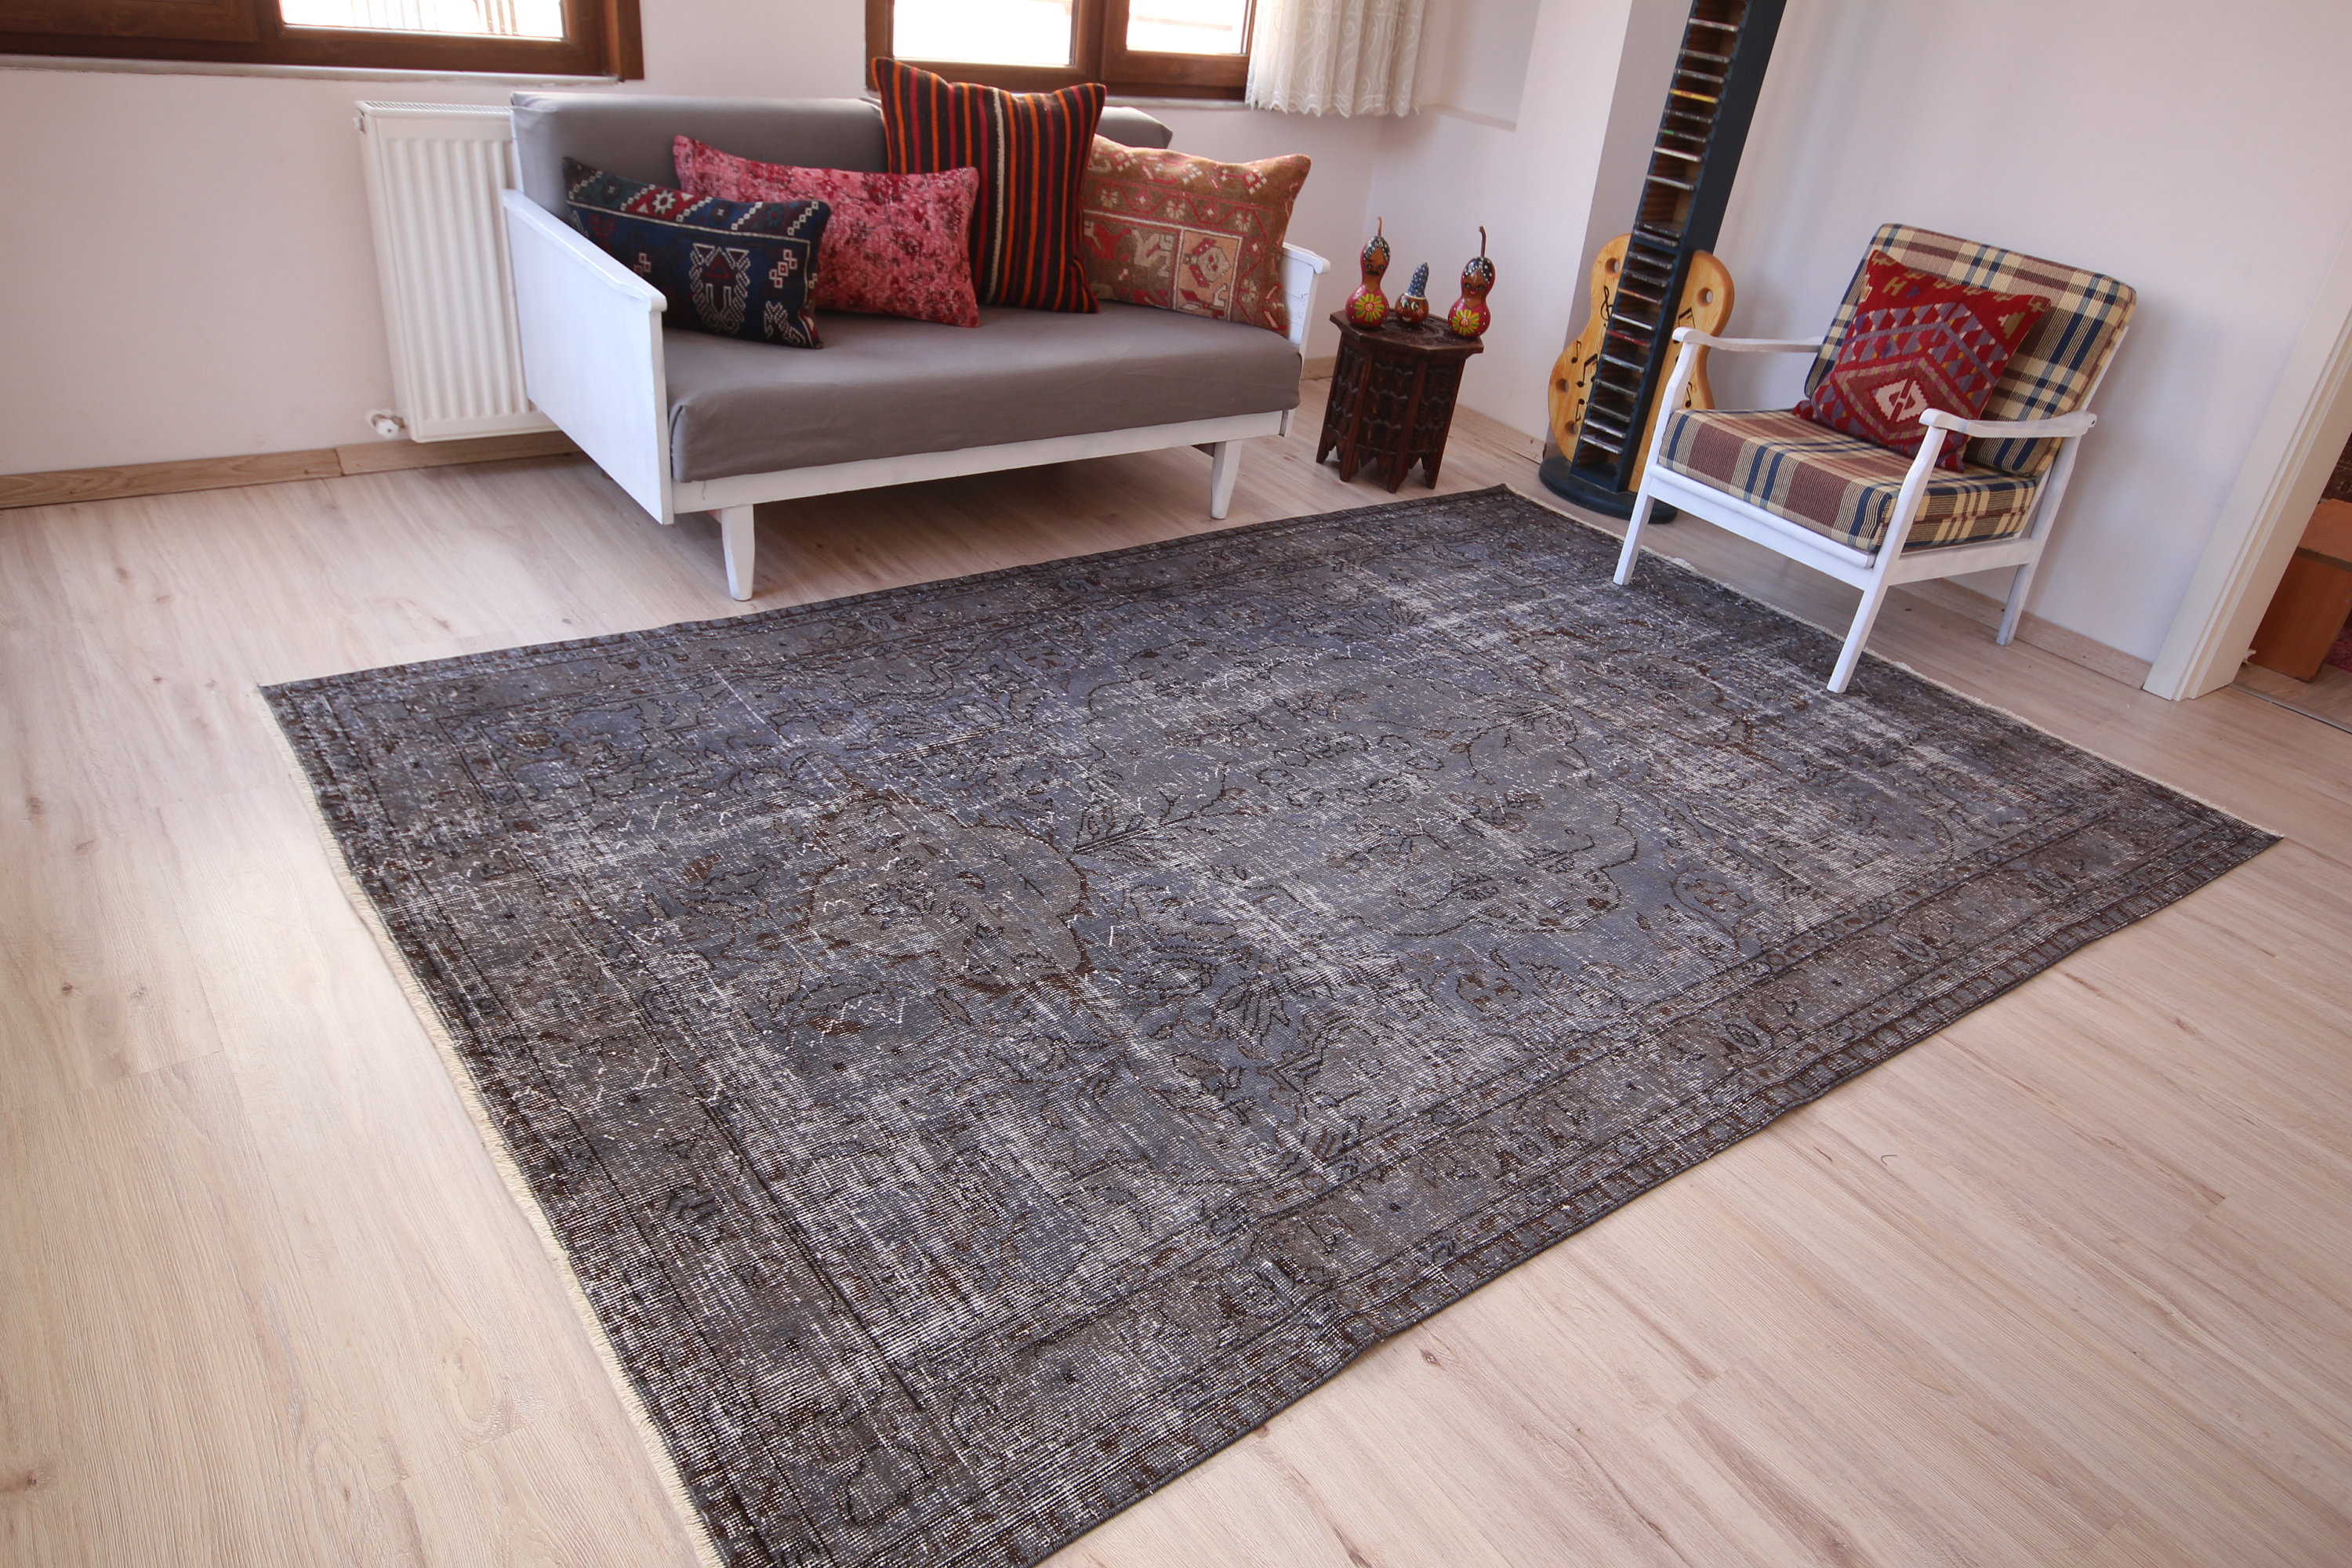 6x9 rug for dining room